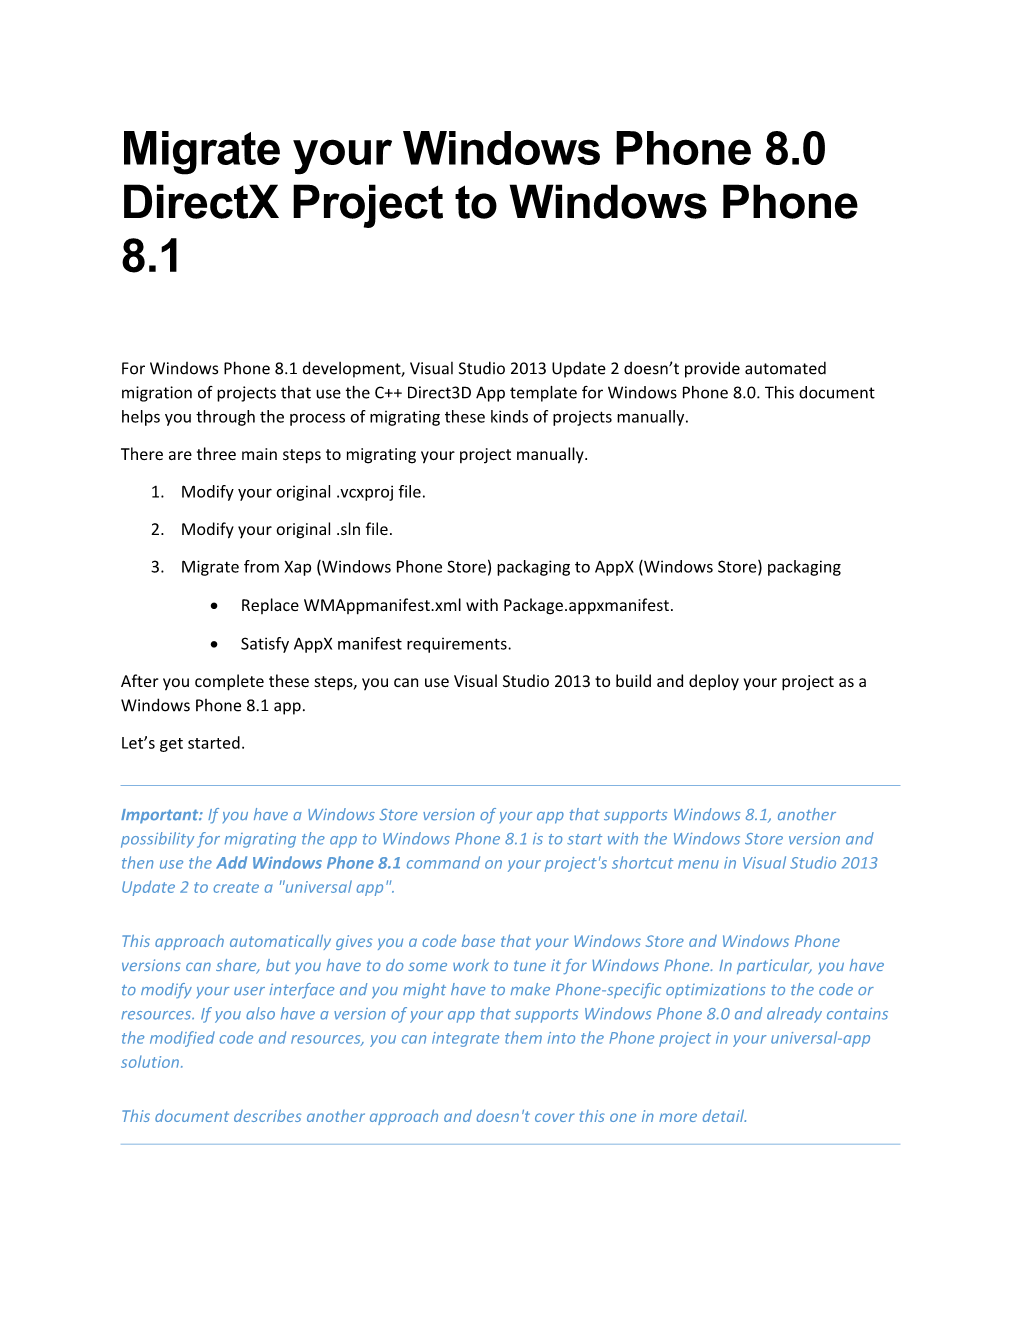 Migrate Your Windows Phone 8.0 Directx Project to Windows Phone 8.1